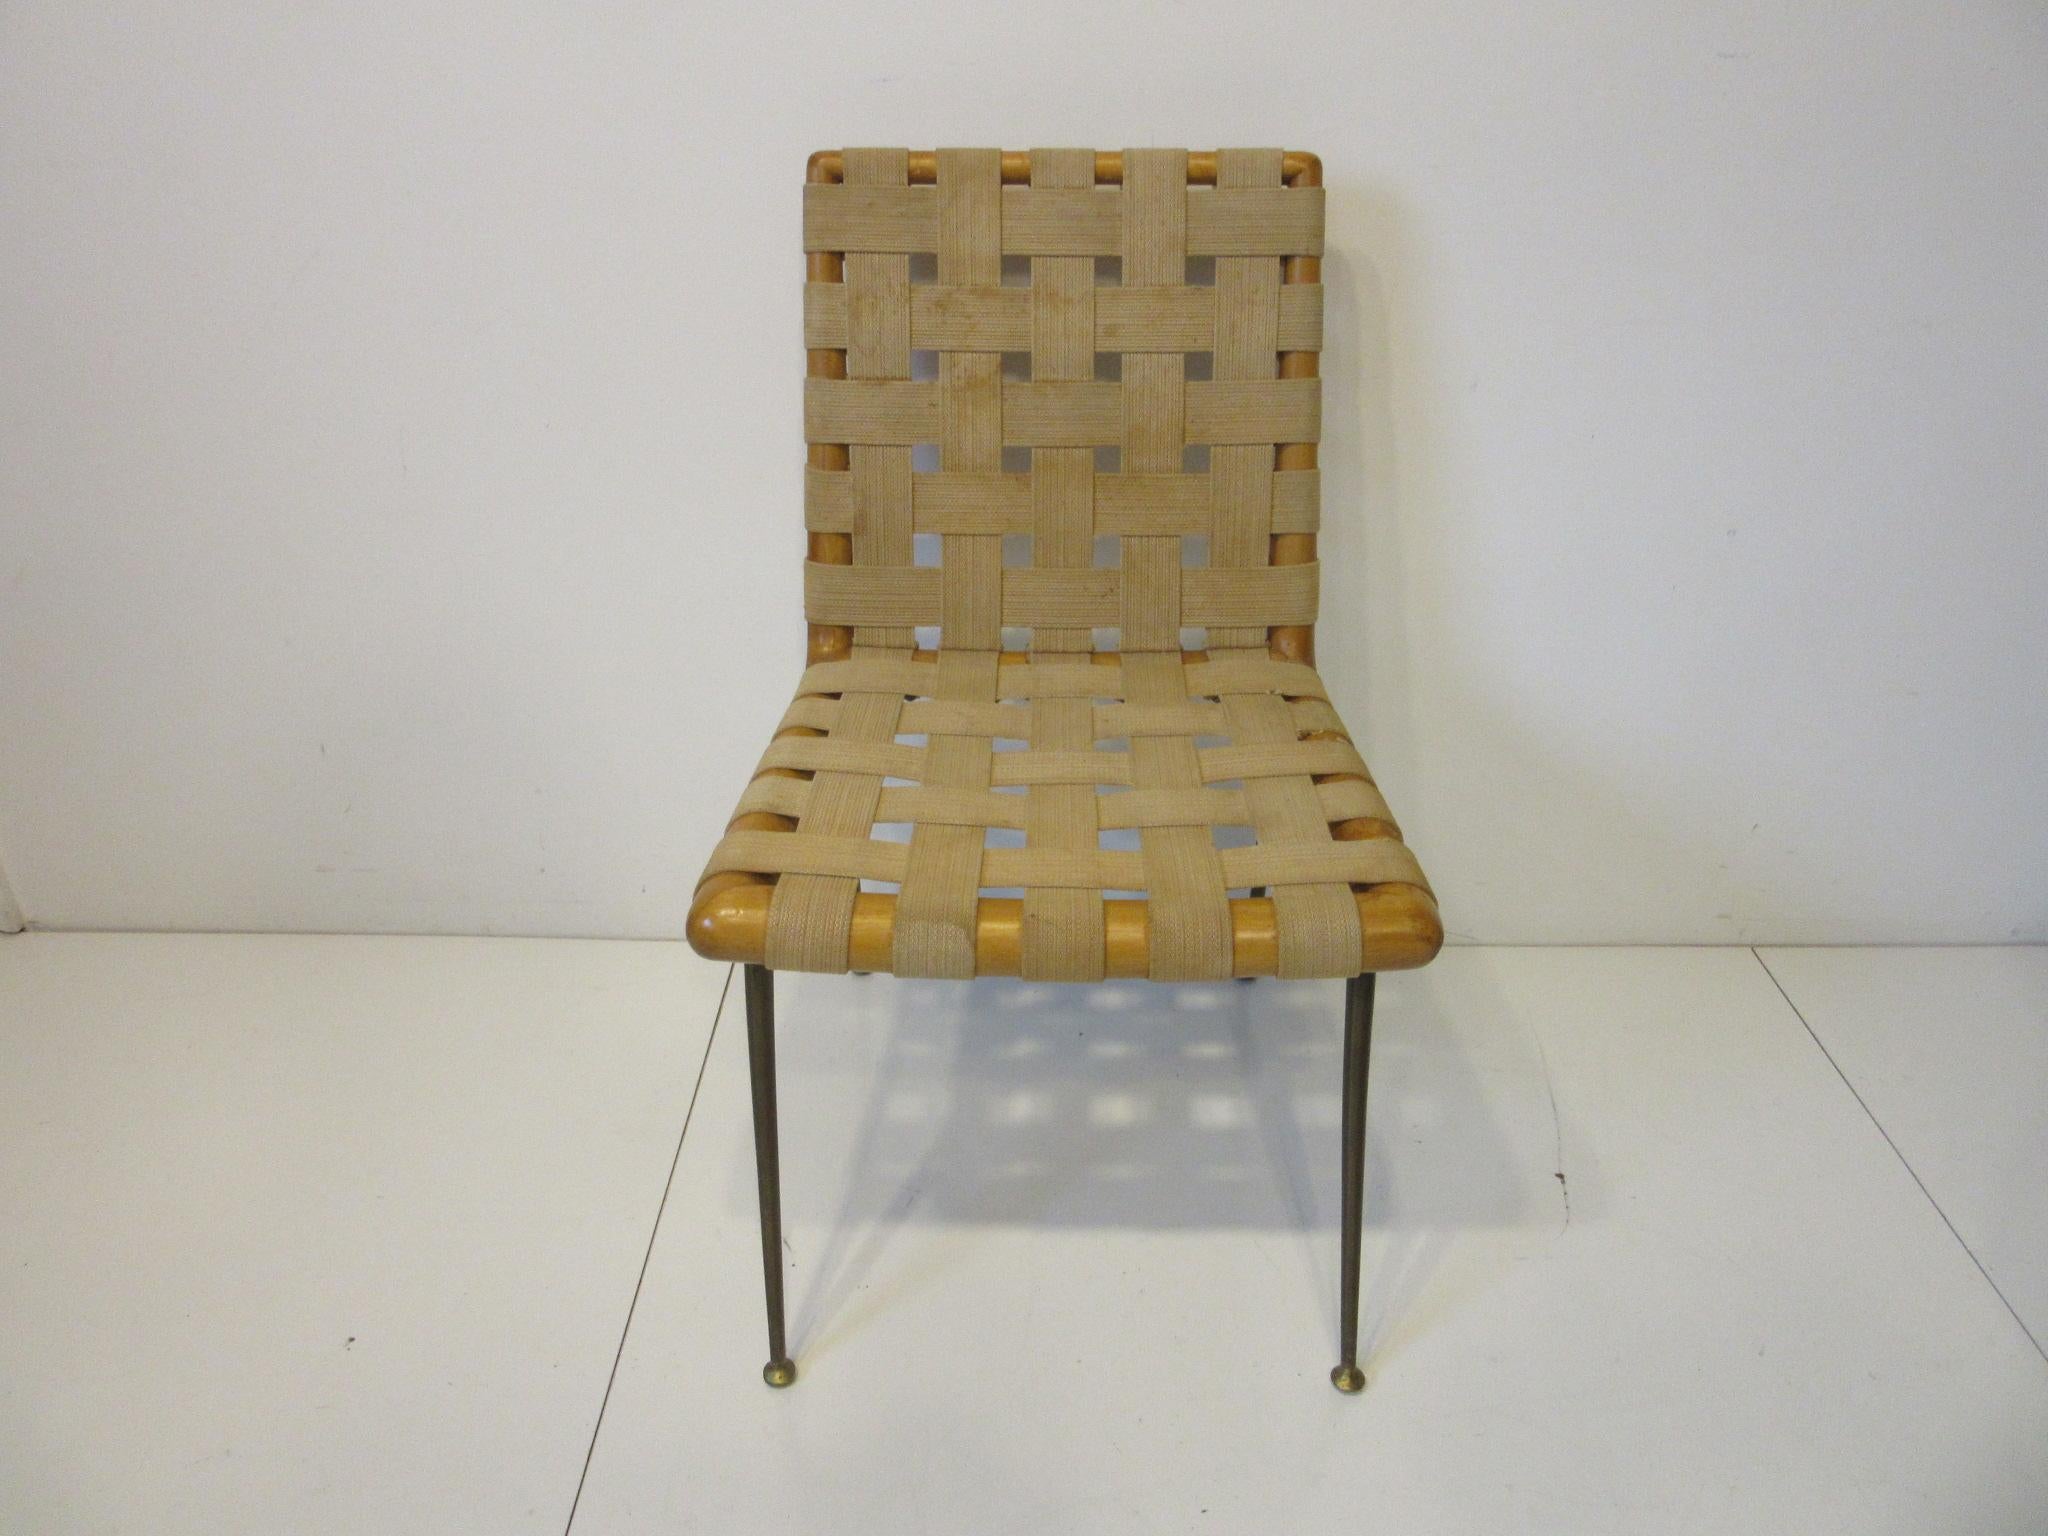 A cotton webbed side chair with solid mahogany sculptural frame and cast brass legs by iconic Mid Century designer T.H. Robsjohn-Gibbings for the Widdicomb Furniture company noted for their well crafted pieces. A great chair for a desk or a special